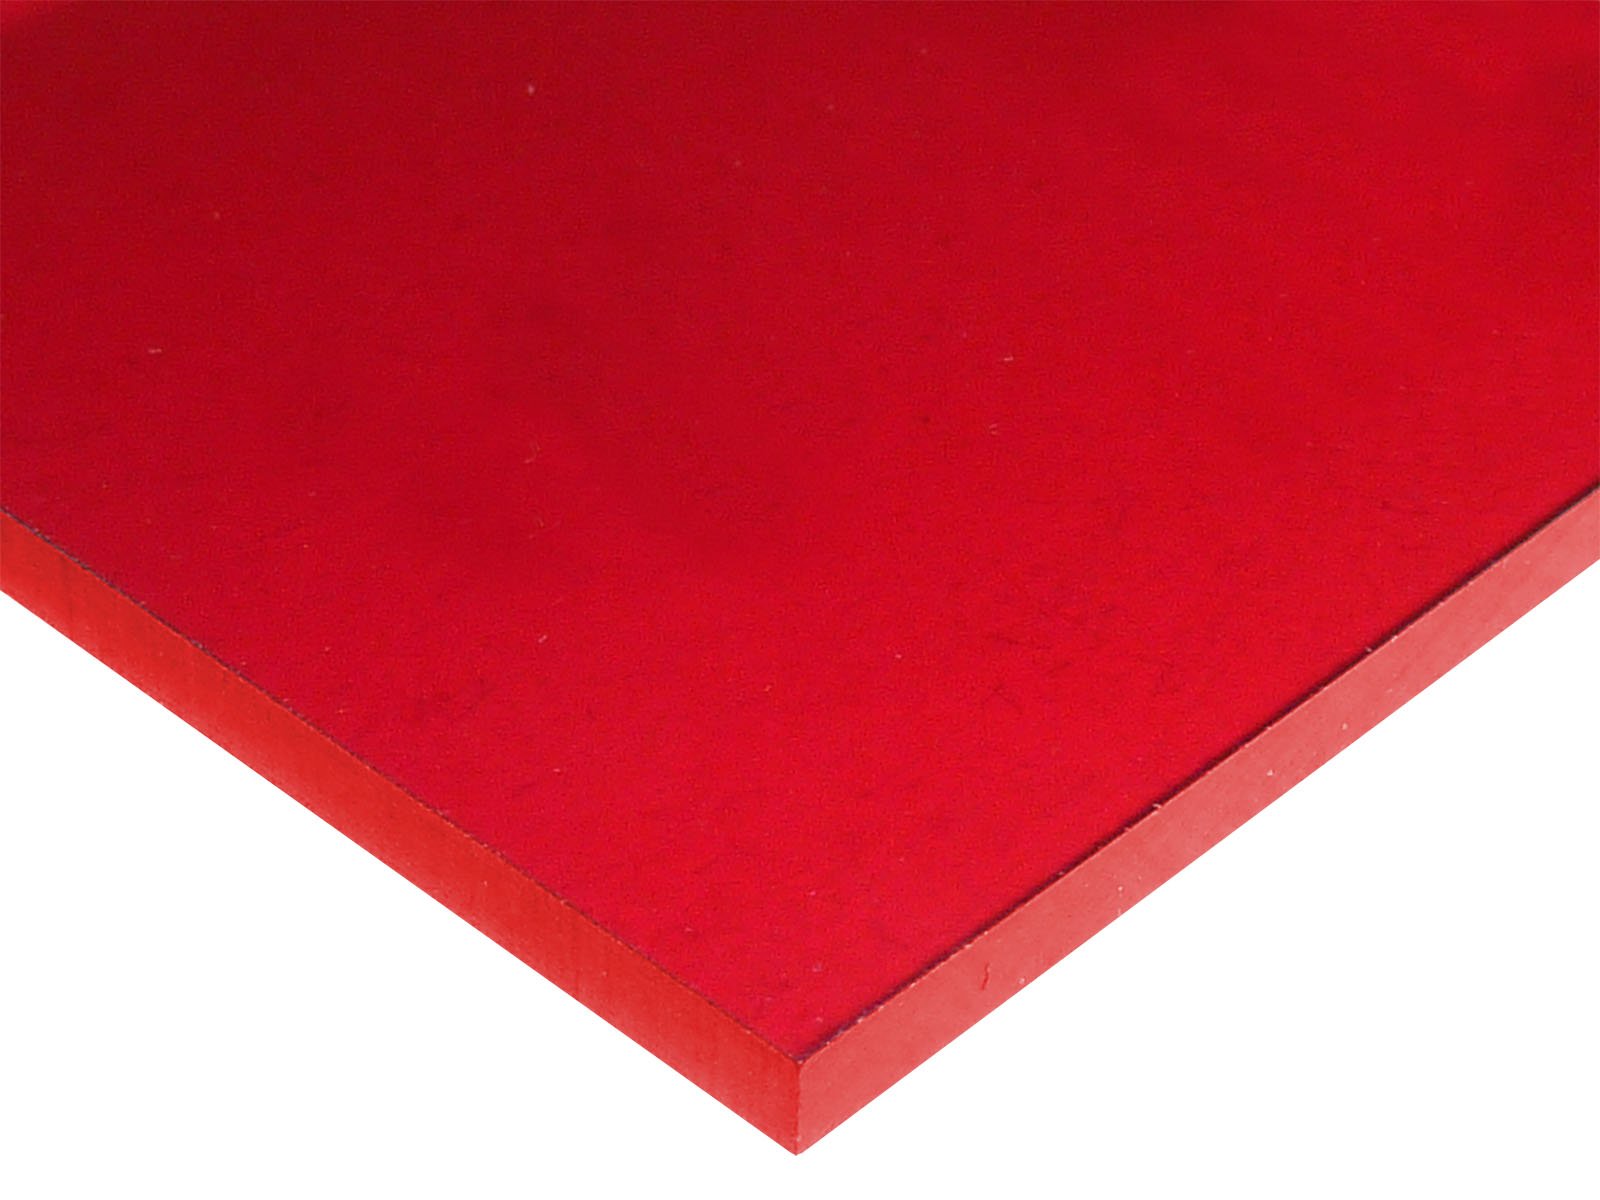 Red Plexiglass Acrylic Sheet  Color #2423 Red   1/8" x 24" x 16"